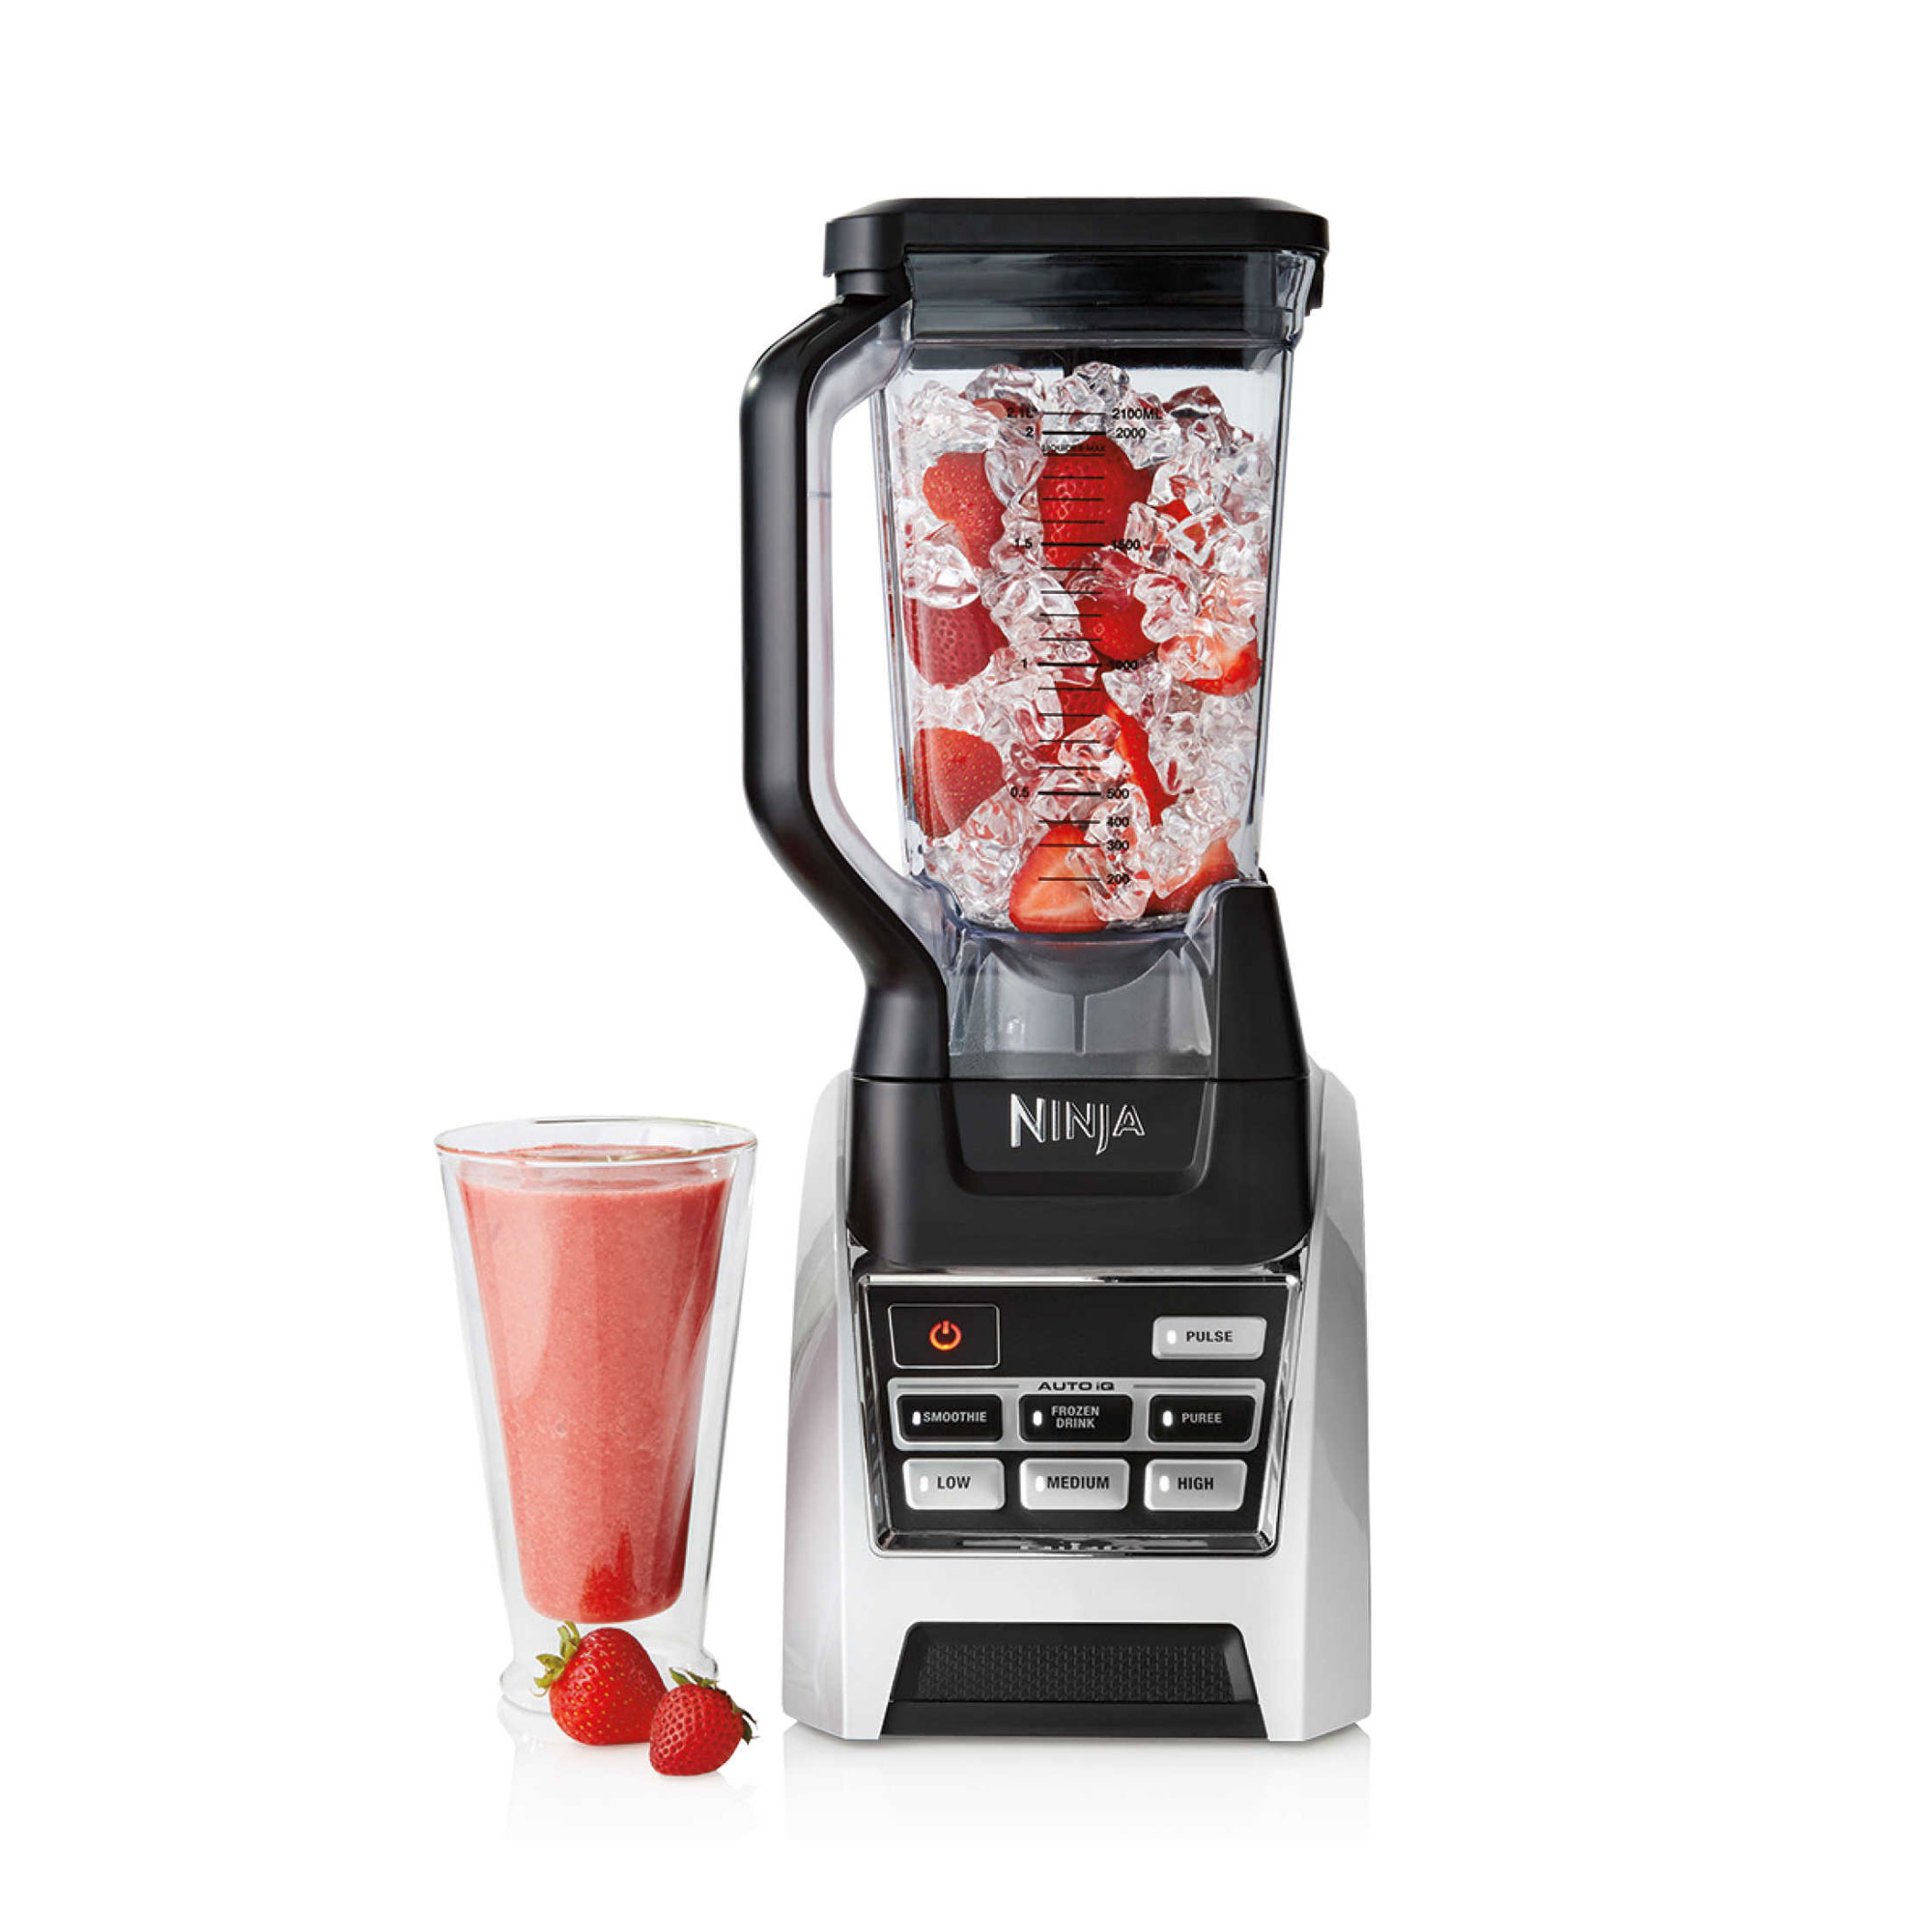 Ninja BL688 Professional Auto iQ Countertop Blender with Total Crushing Technology, Black, 72 Oz - image 2 of 3